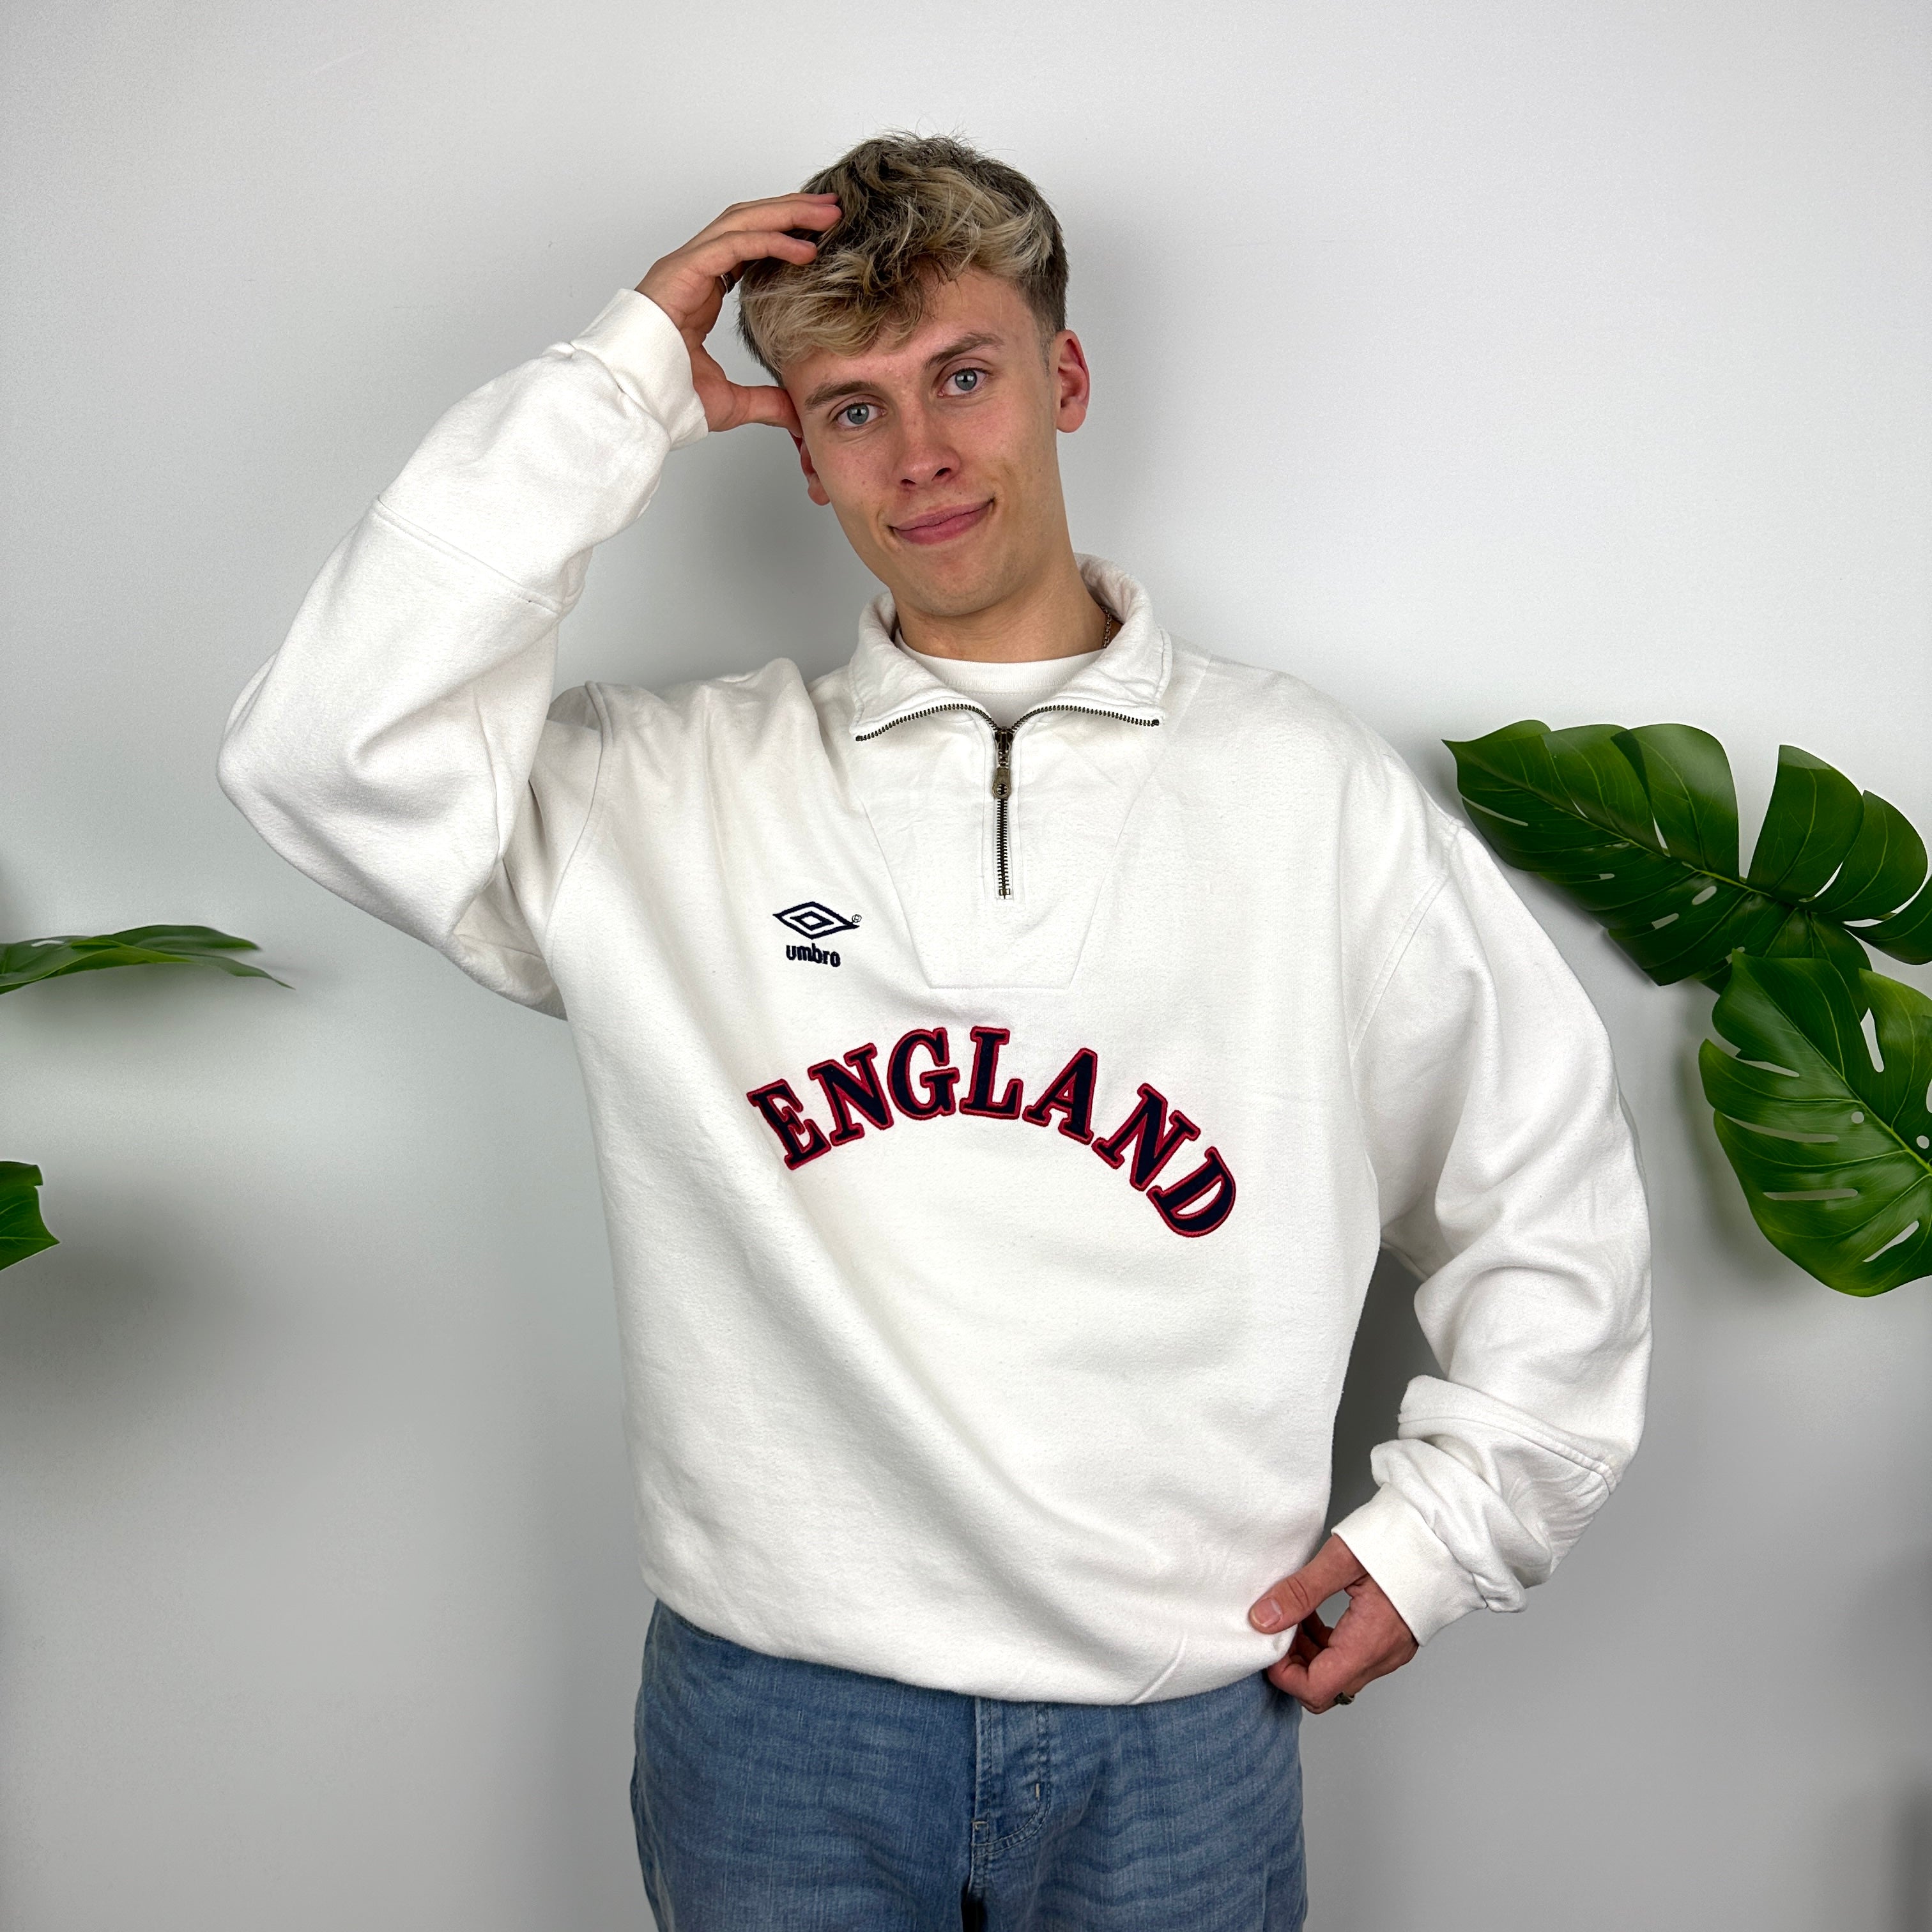 Umbro X England RARE White Embroidered Spell Out Quarter Zip Sweatshirt (XL)